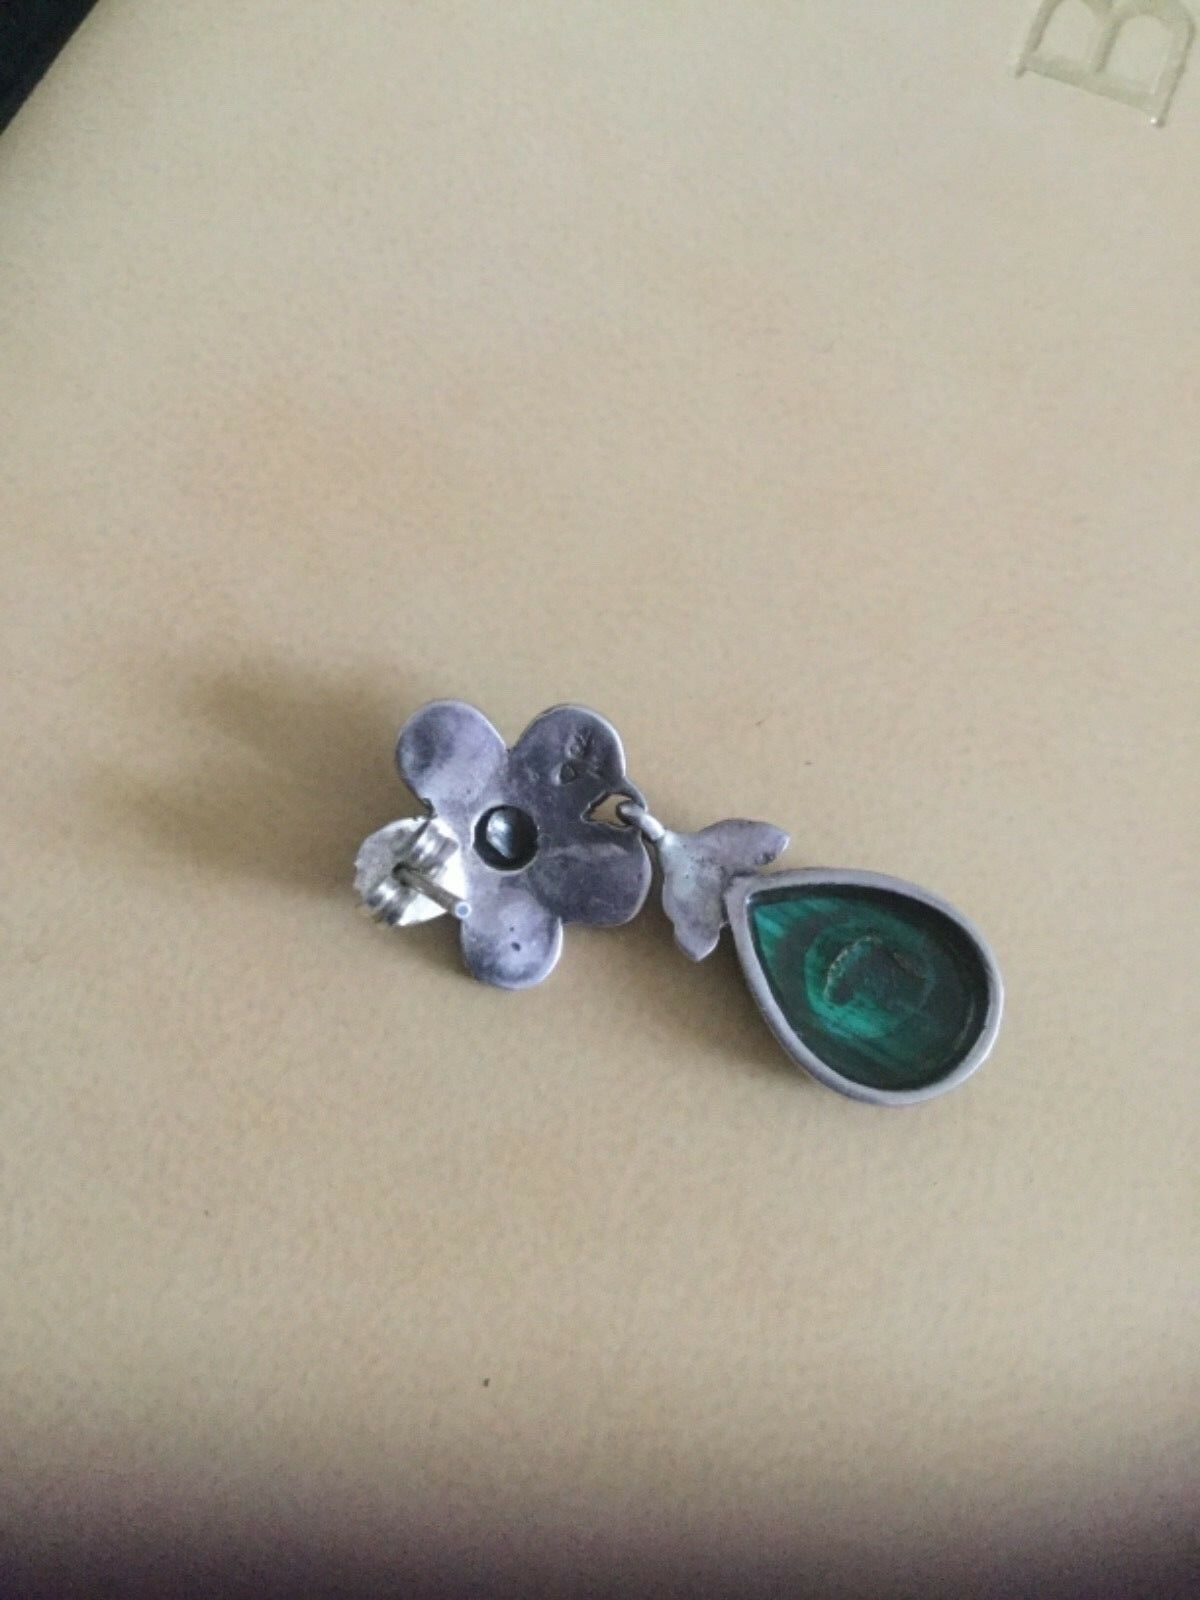 Vintage Silver Marcasite and Green Malachite Earrings - Image 5 of 5